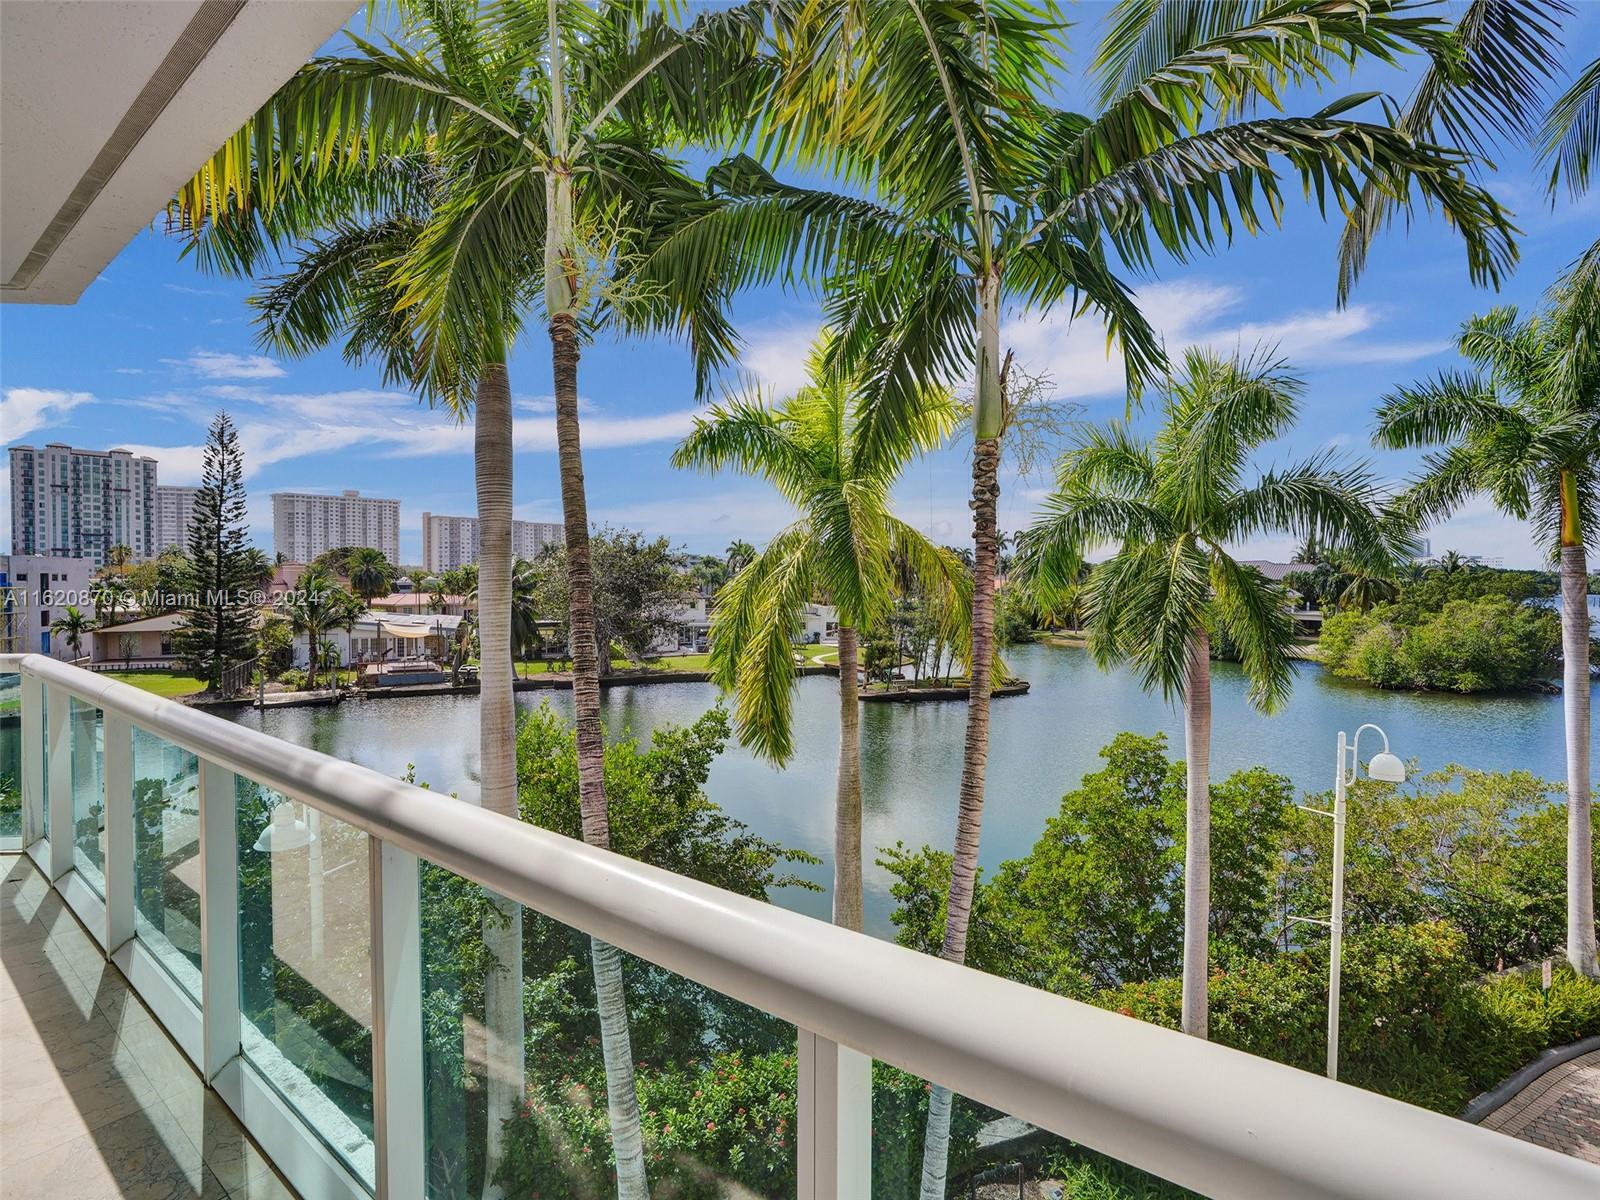 Price reduced for quick sale!!! Live in your own waterfront tri-level home in paradise! This corner home boasts spectacular views from 4 terraces. 4 bedrooms plus hobby room, and a maid room, 4.5 bathrooms, and a private garage! 3 stories, large spacious and high ceilings, 3,500 sqft. with top of the line amenities— beach club access, spa, gym, tennis courts and even boat dock availability! A true gem of a property. The perfect mix of a home and a condo, privacy without the maintenance; yet with all the amazing amenities of a luxurious building.